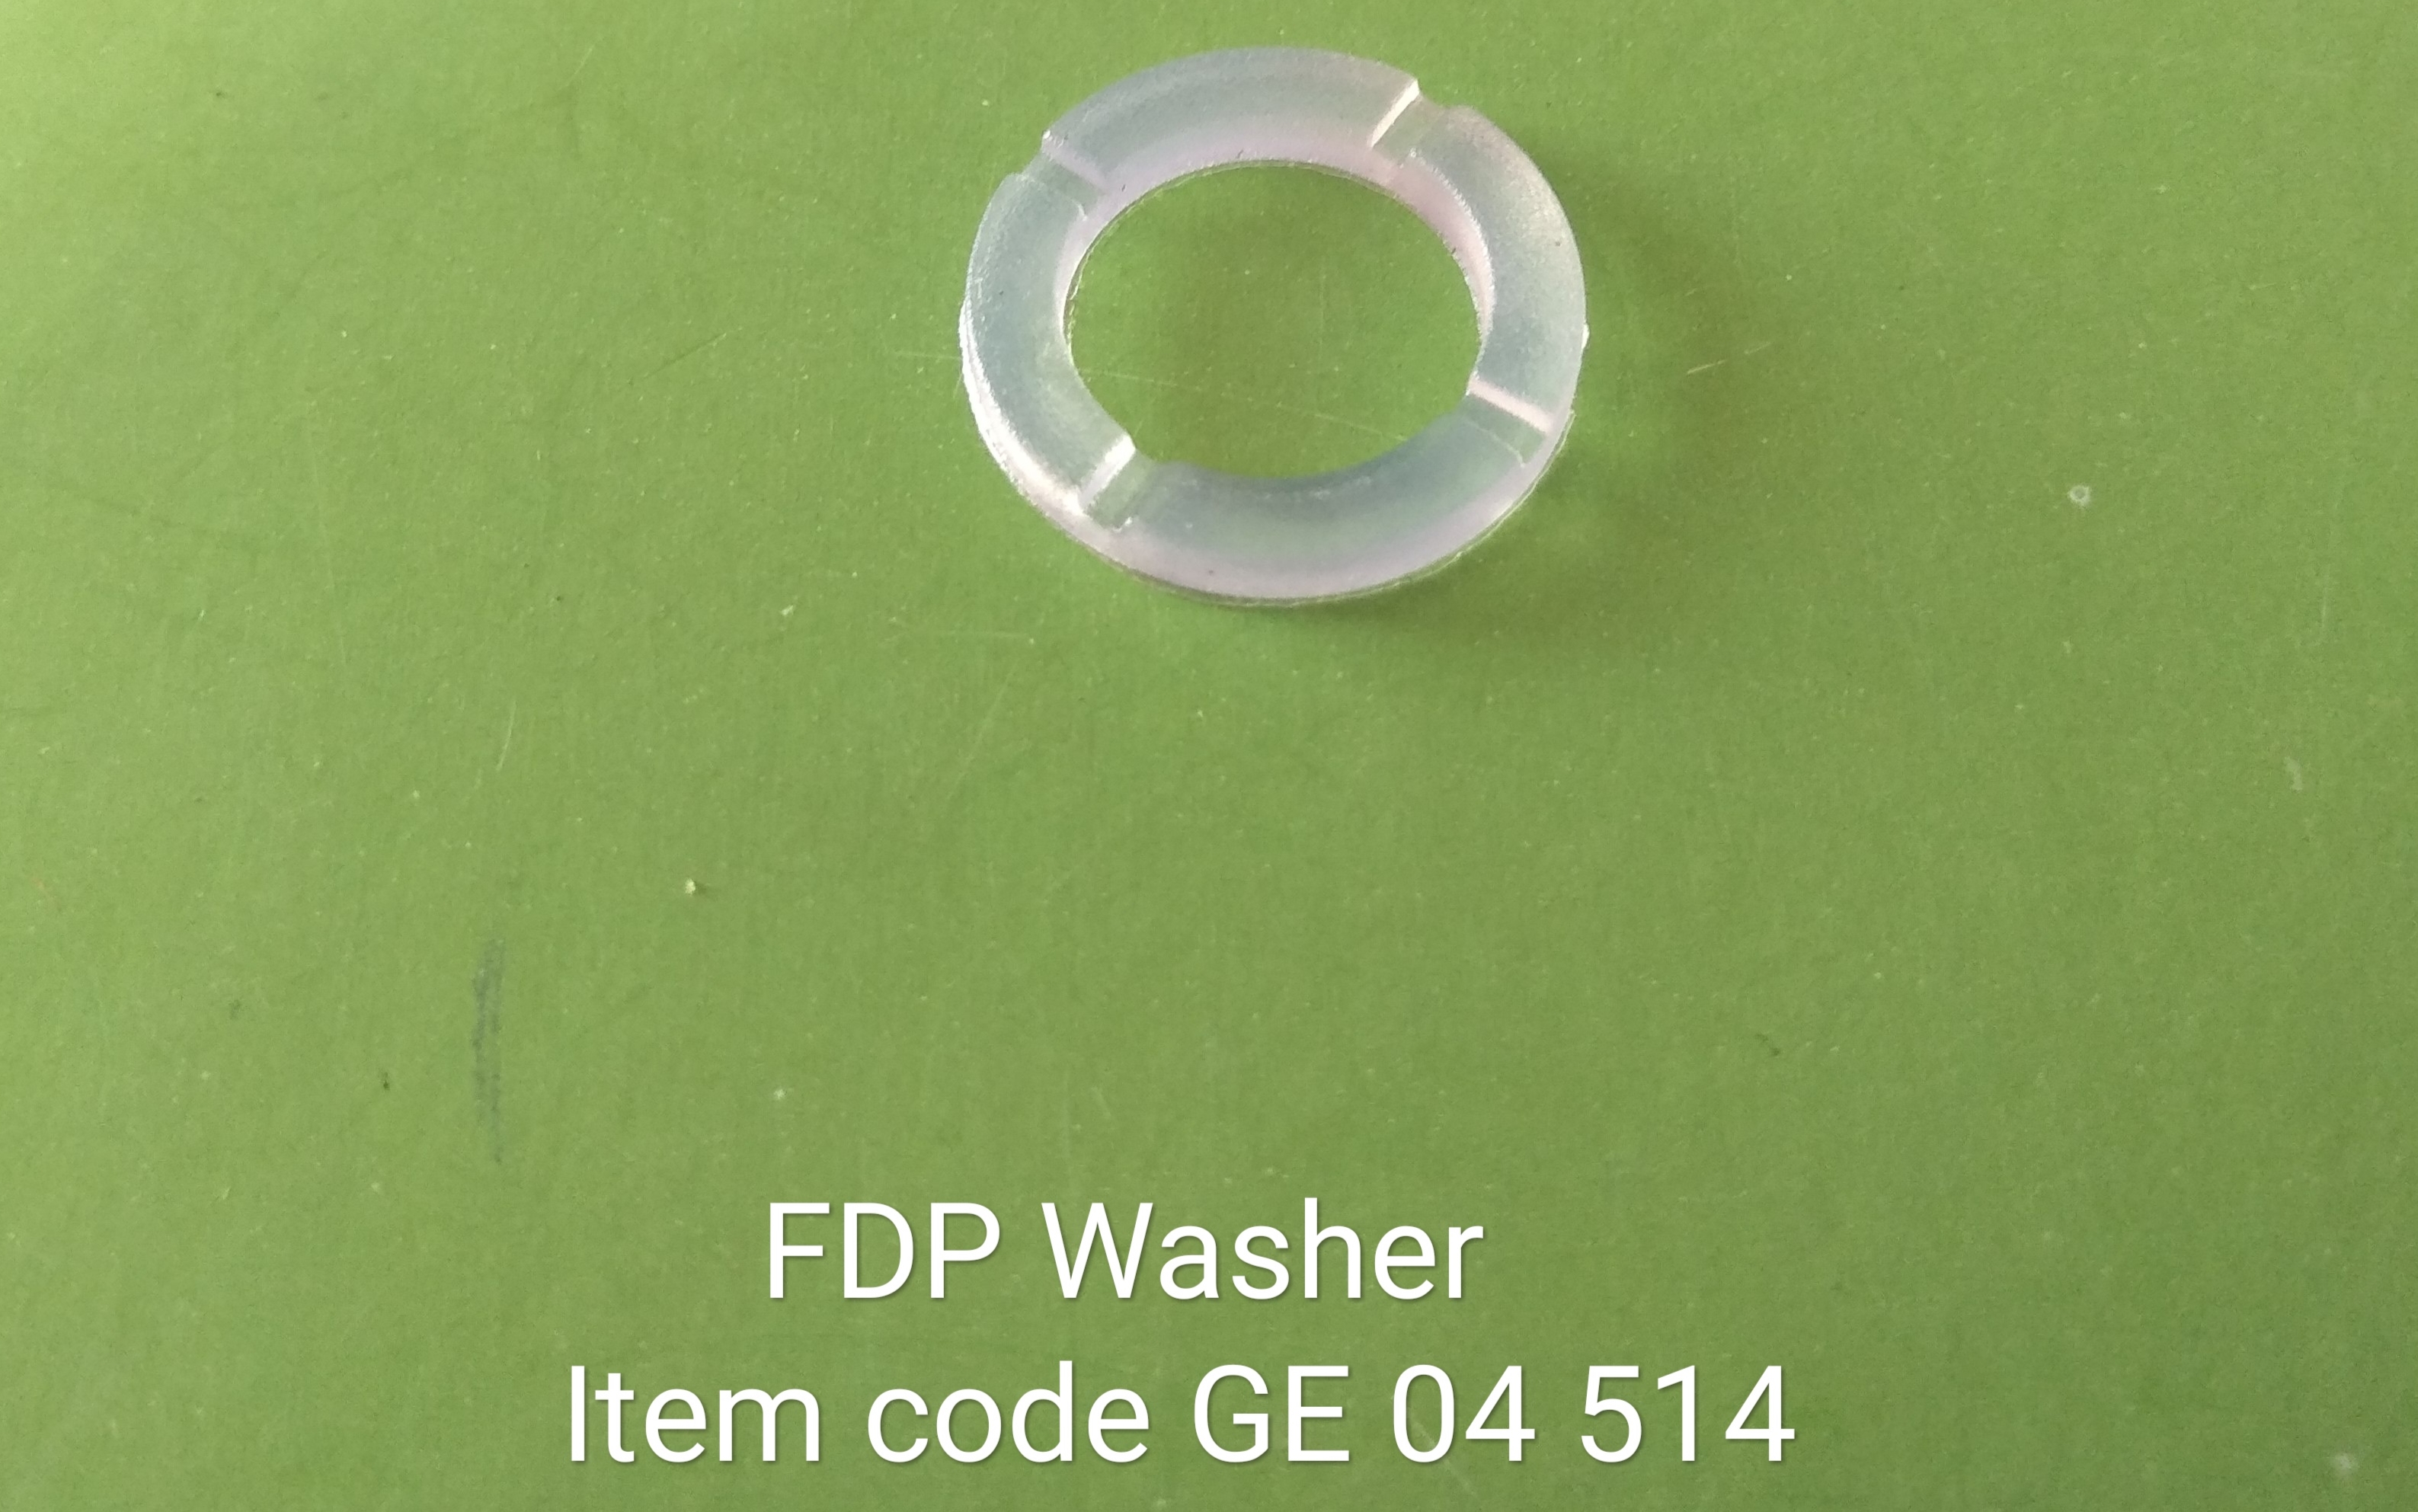 GE_04_514_FDP_Washer_For_Toyota_610_53_18.jpg